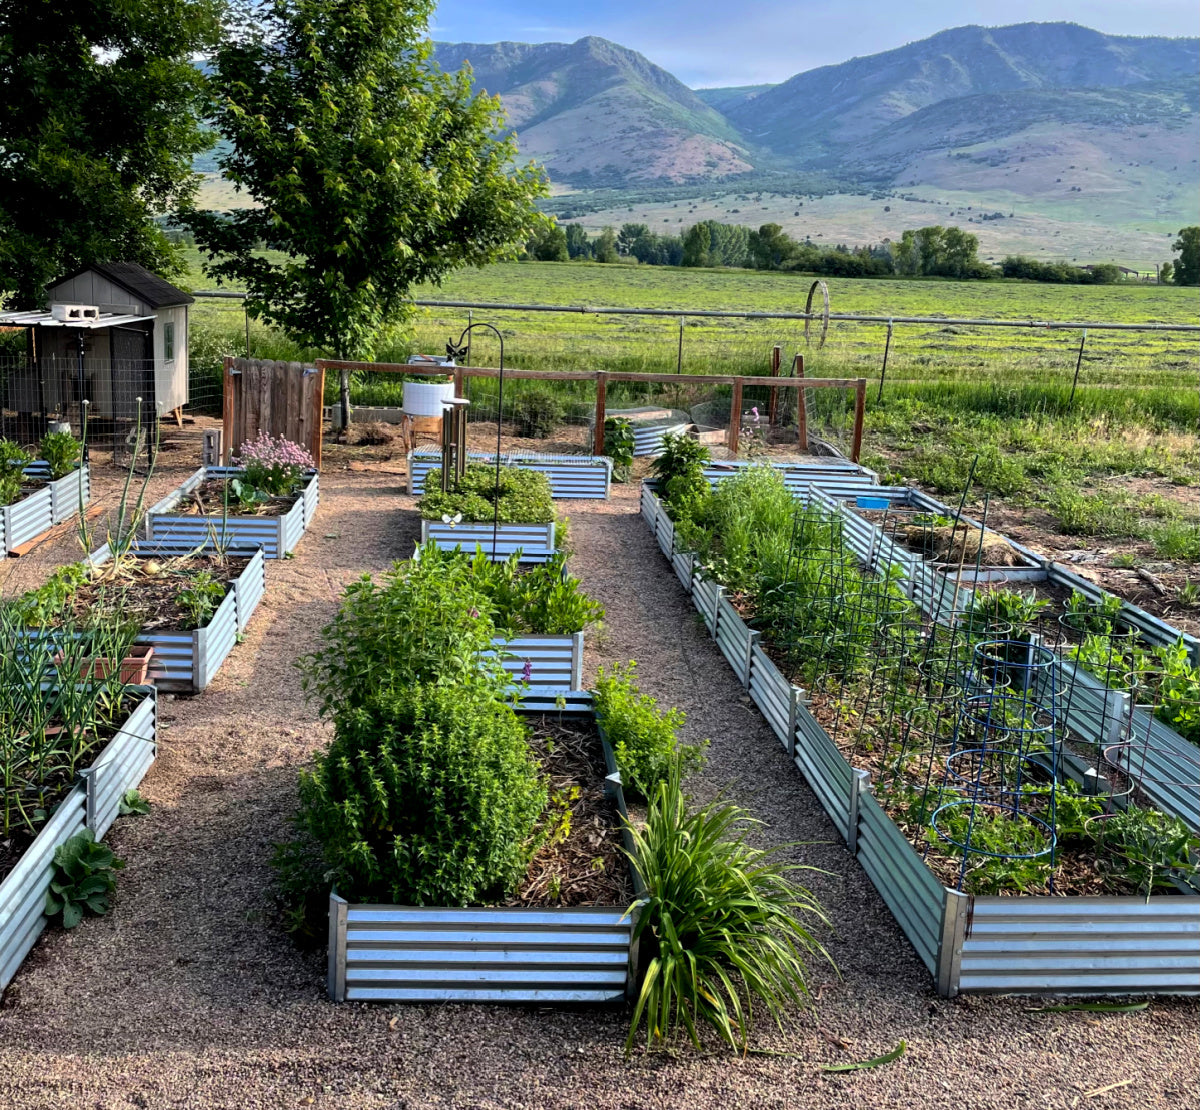 metal garden beds in the mountains